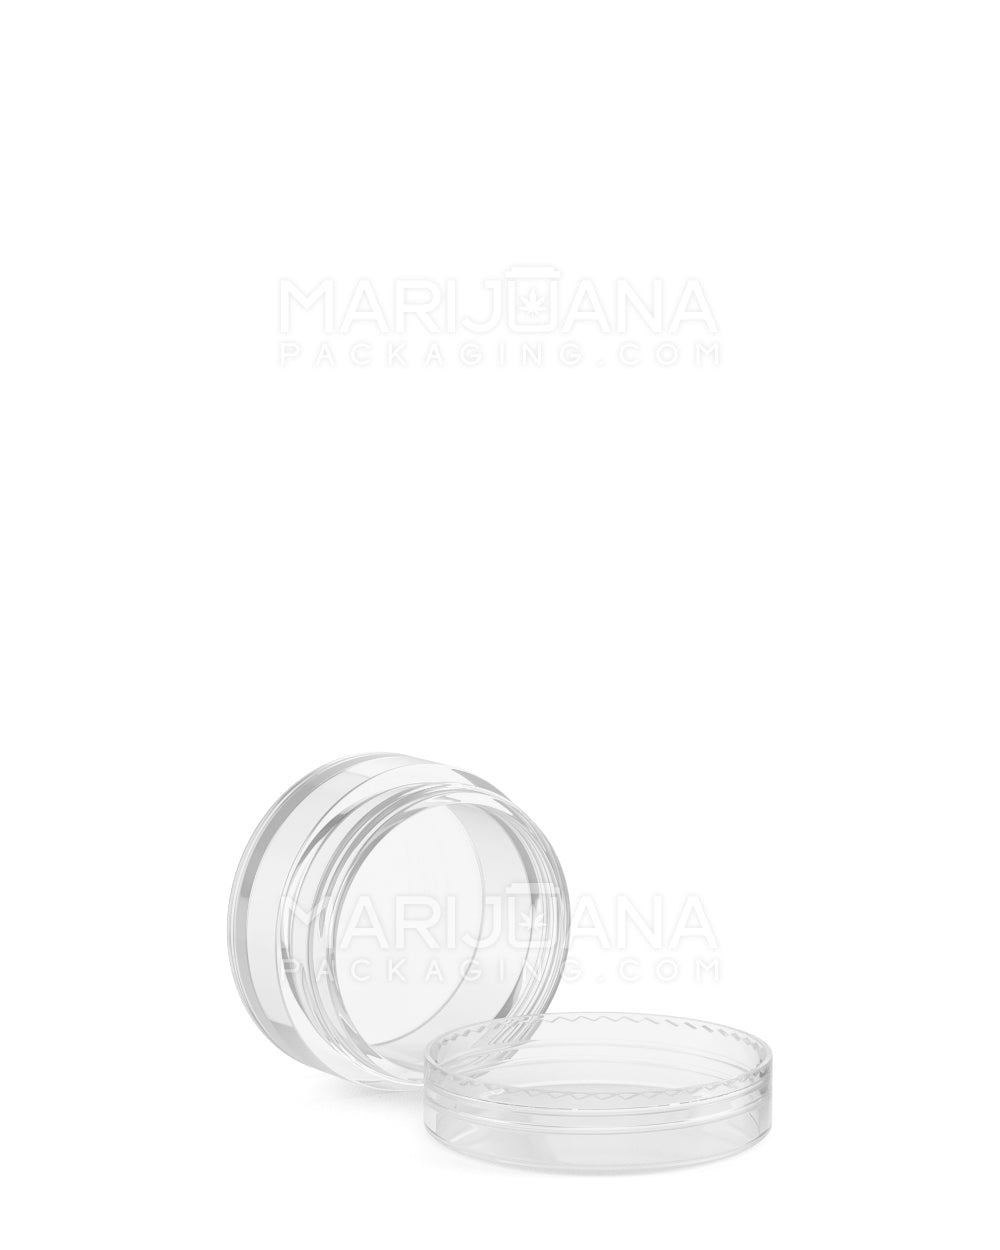 Clear Concentrate Containers w/ Screw Top Cap | 5mL - Plastic - 250 Count - 3